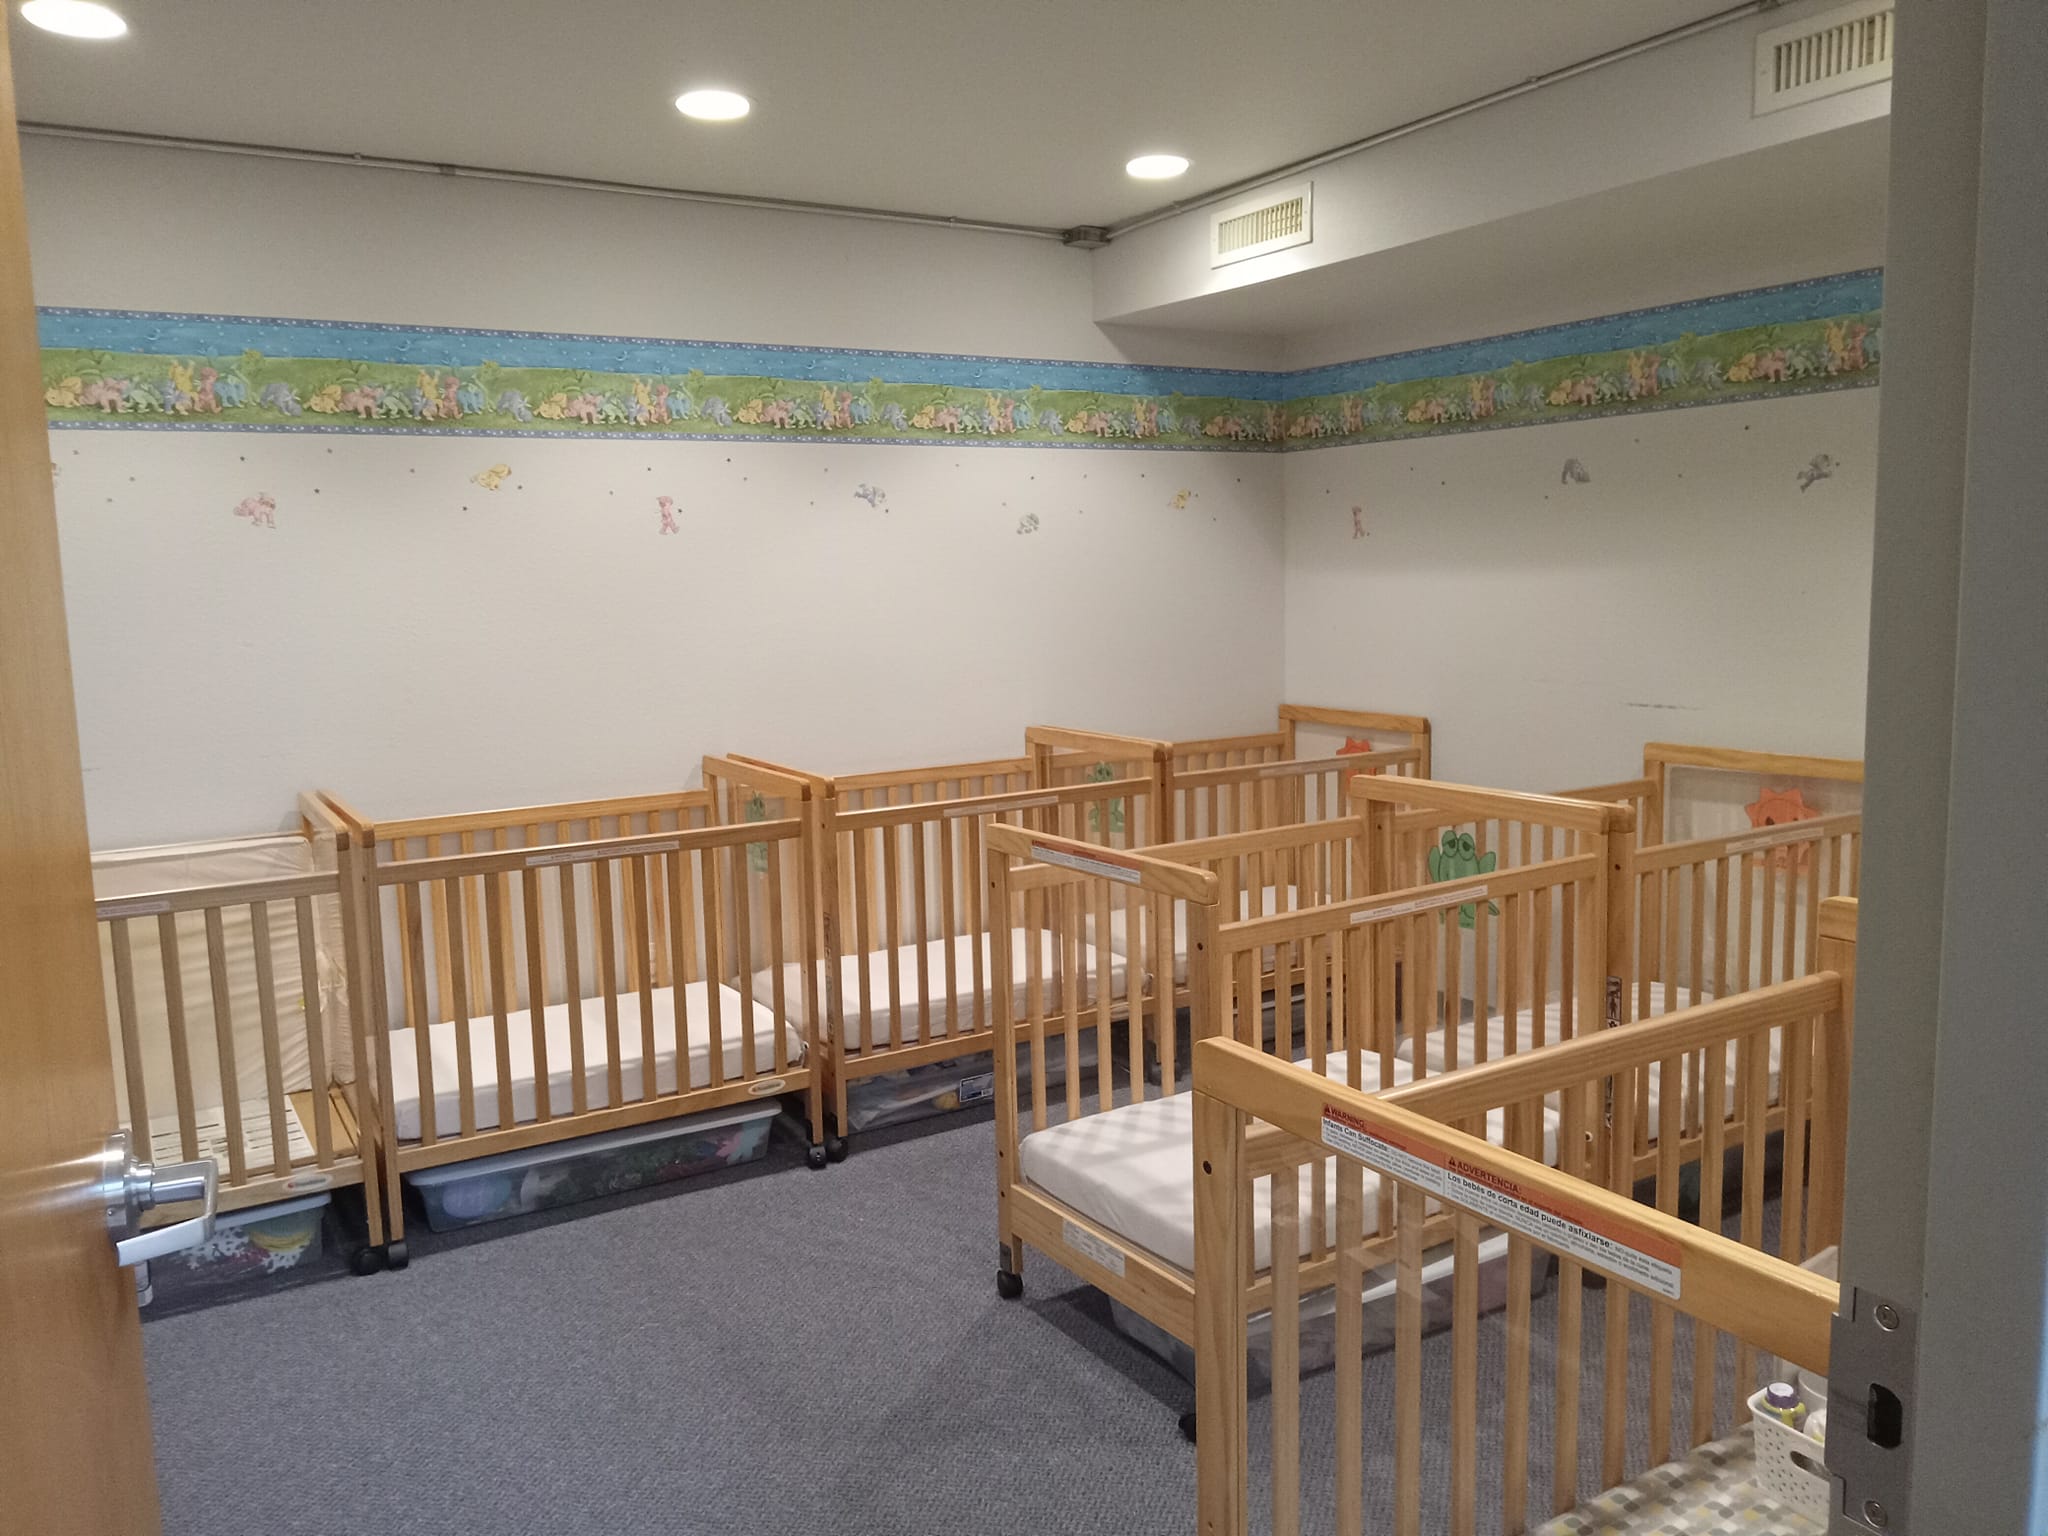 Tour Faith of a Child Learning Center Infant Sleeping Room